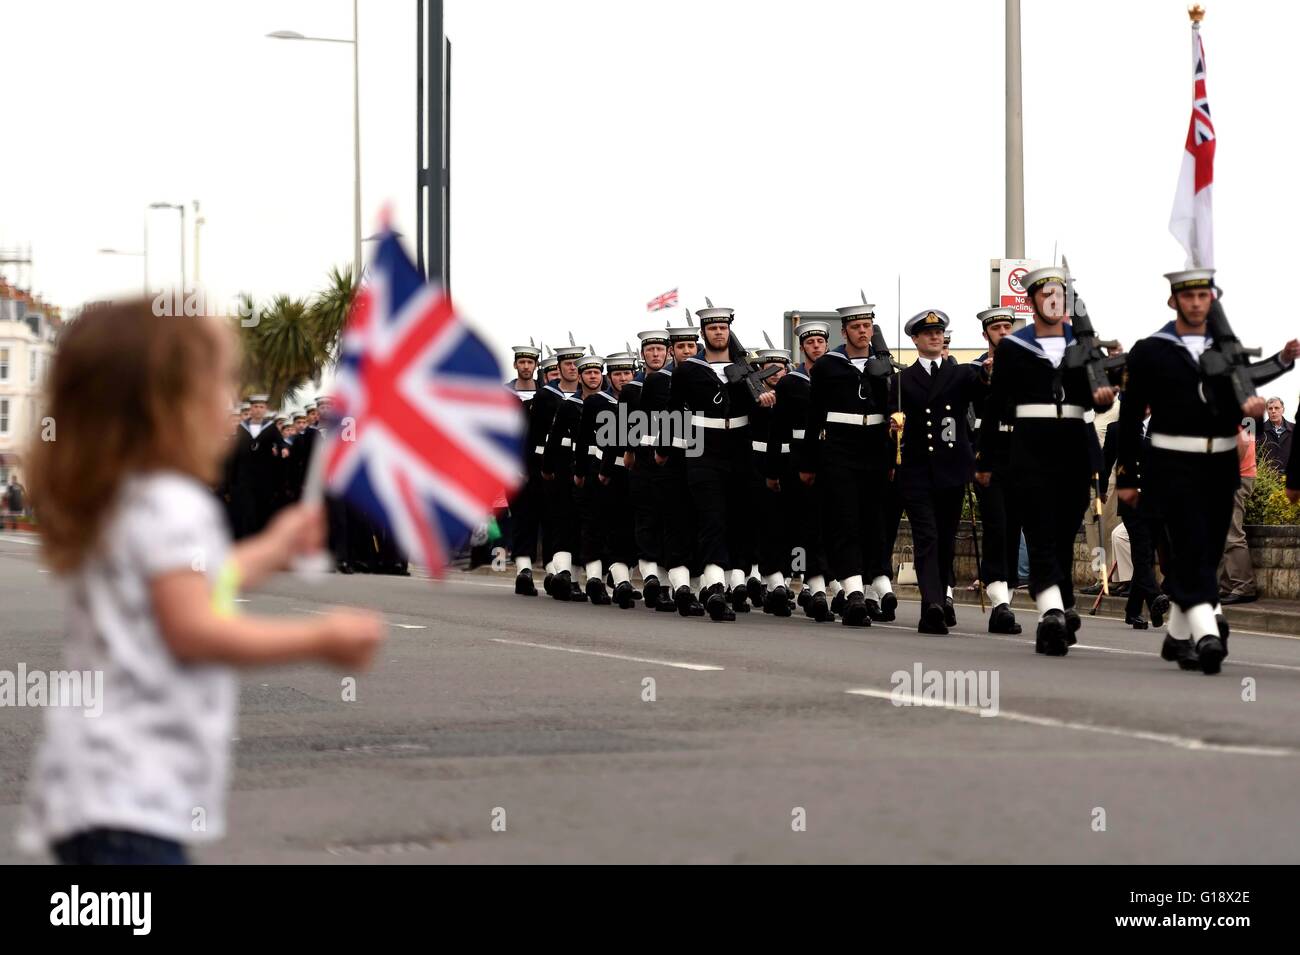 Girl with a British flag during a military parade, UK Stock Photo